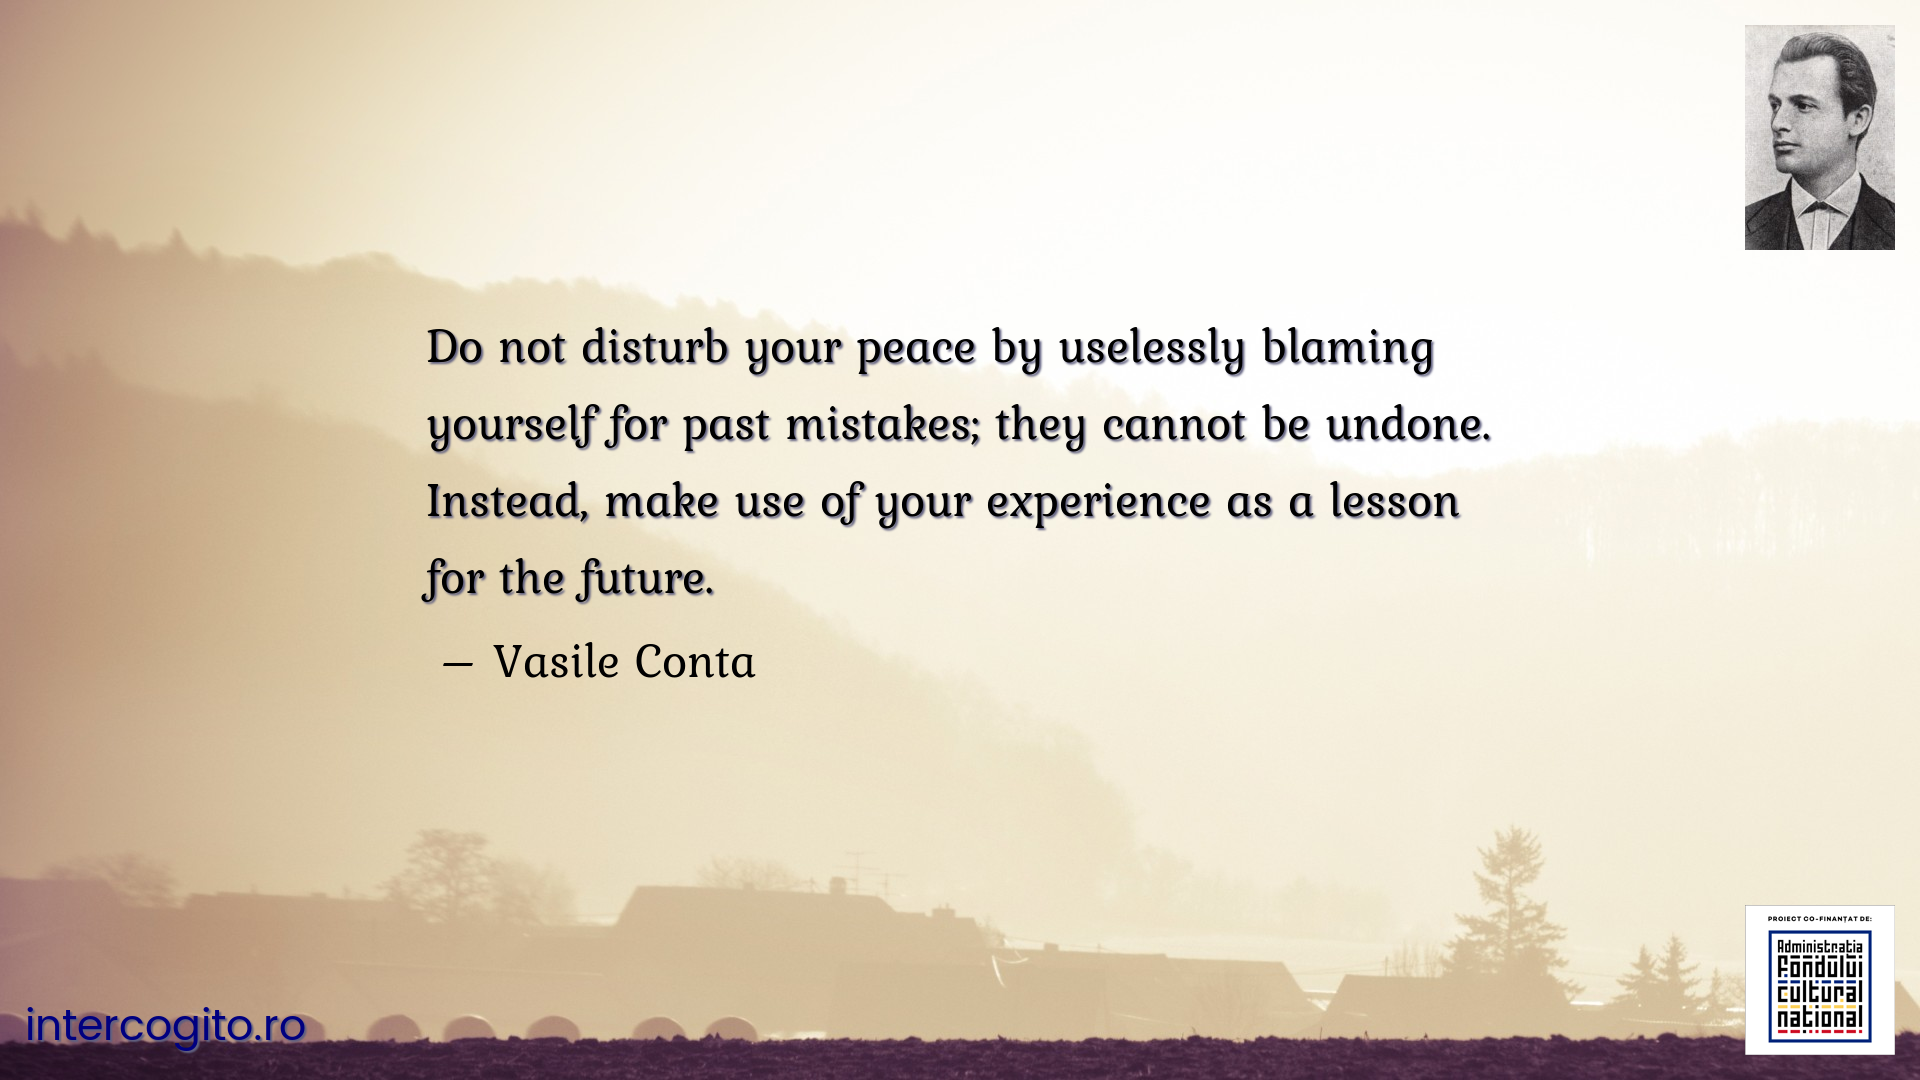 Do not disturb your peace by uselessly blaming yourself for past mistakes; they cannot be undone. Instead, make use of your experience as a lesson for the future.